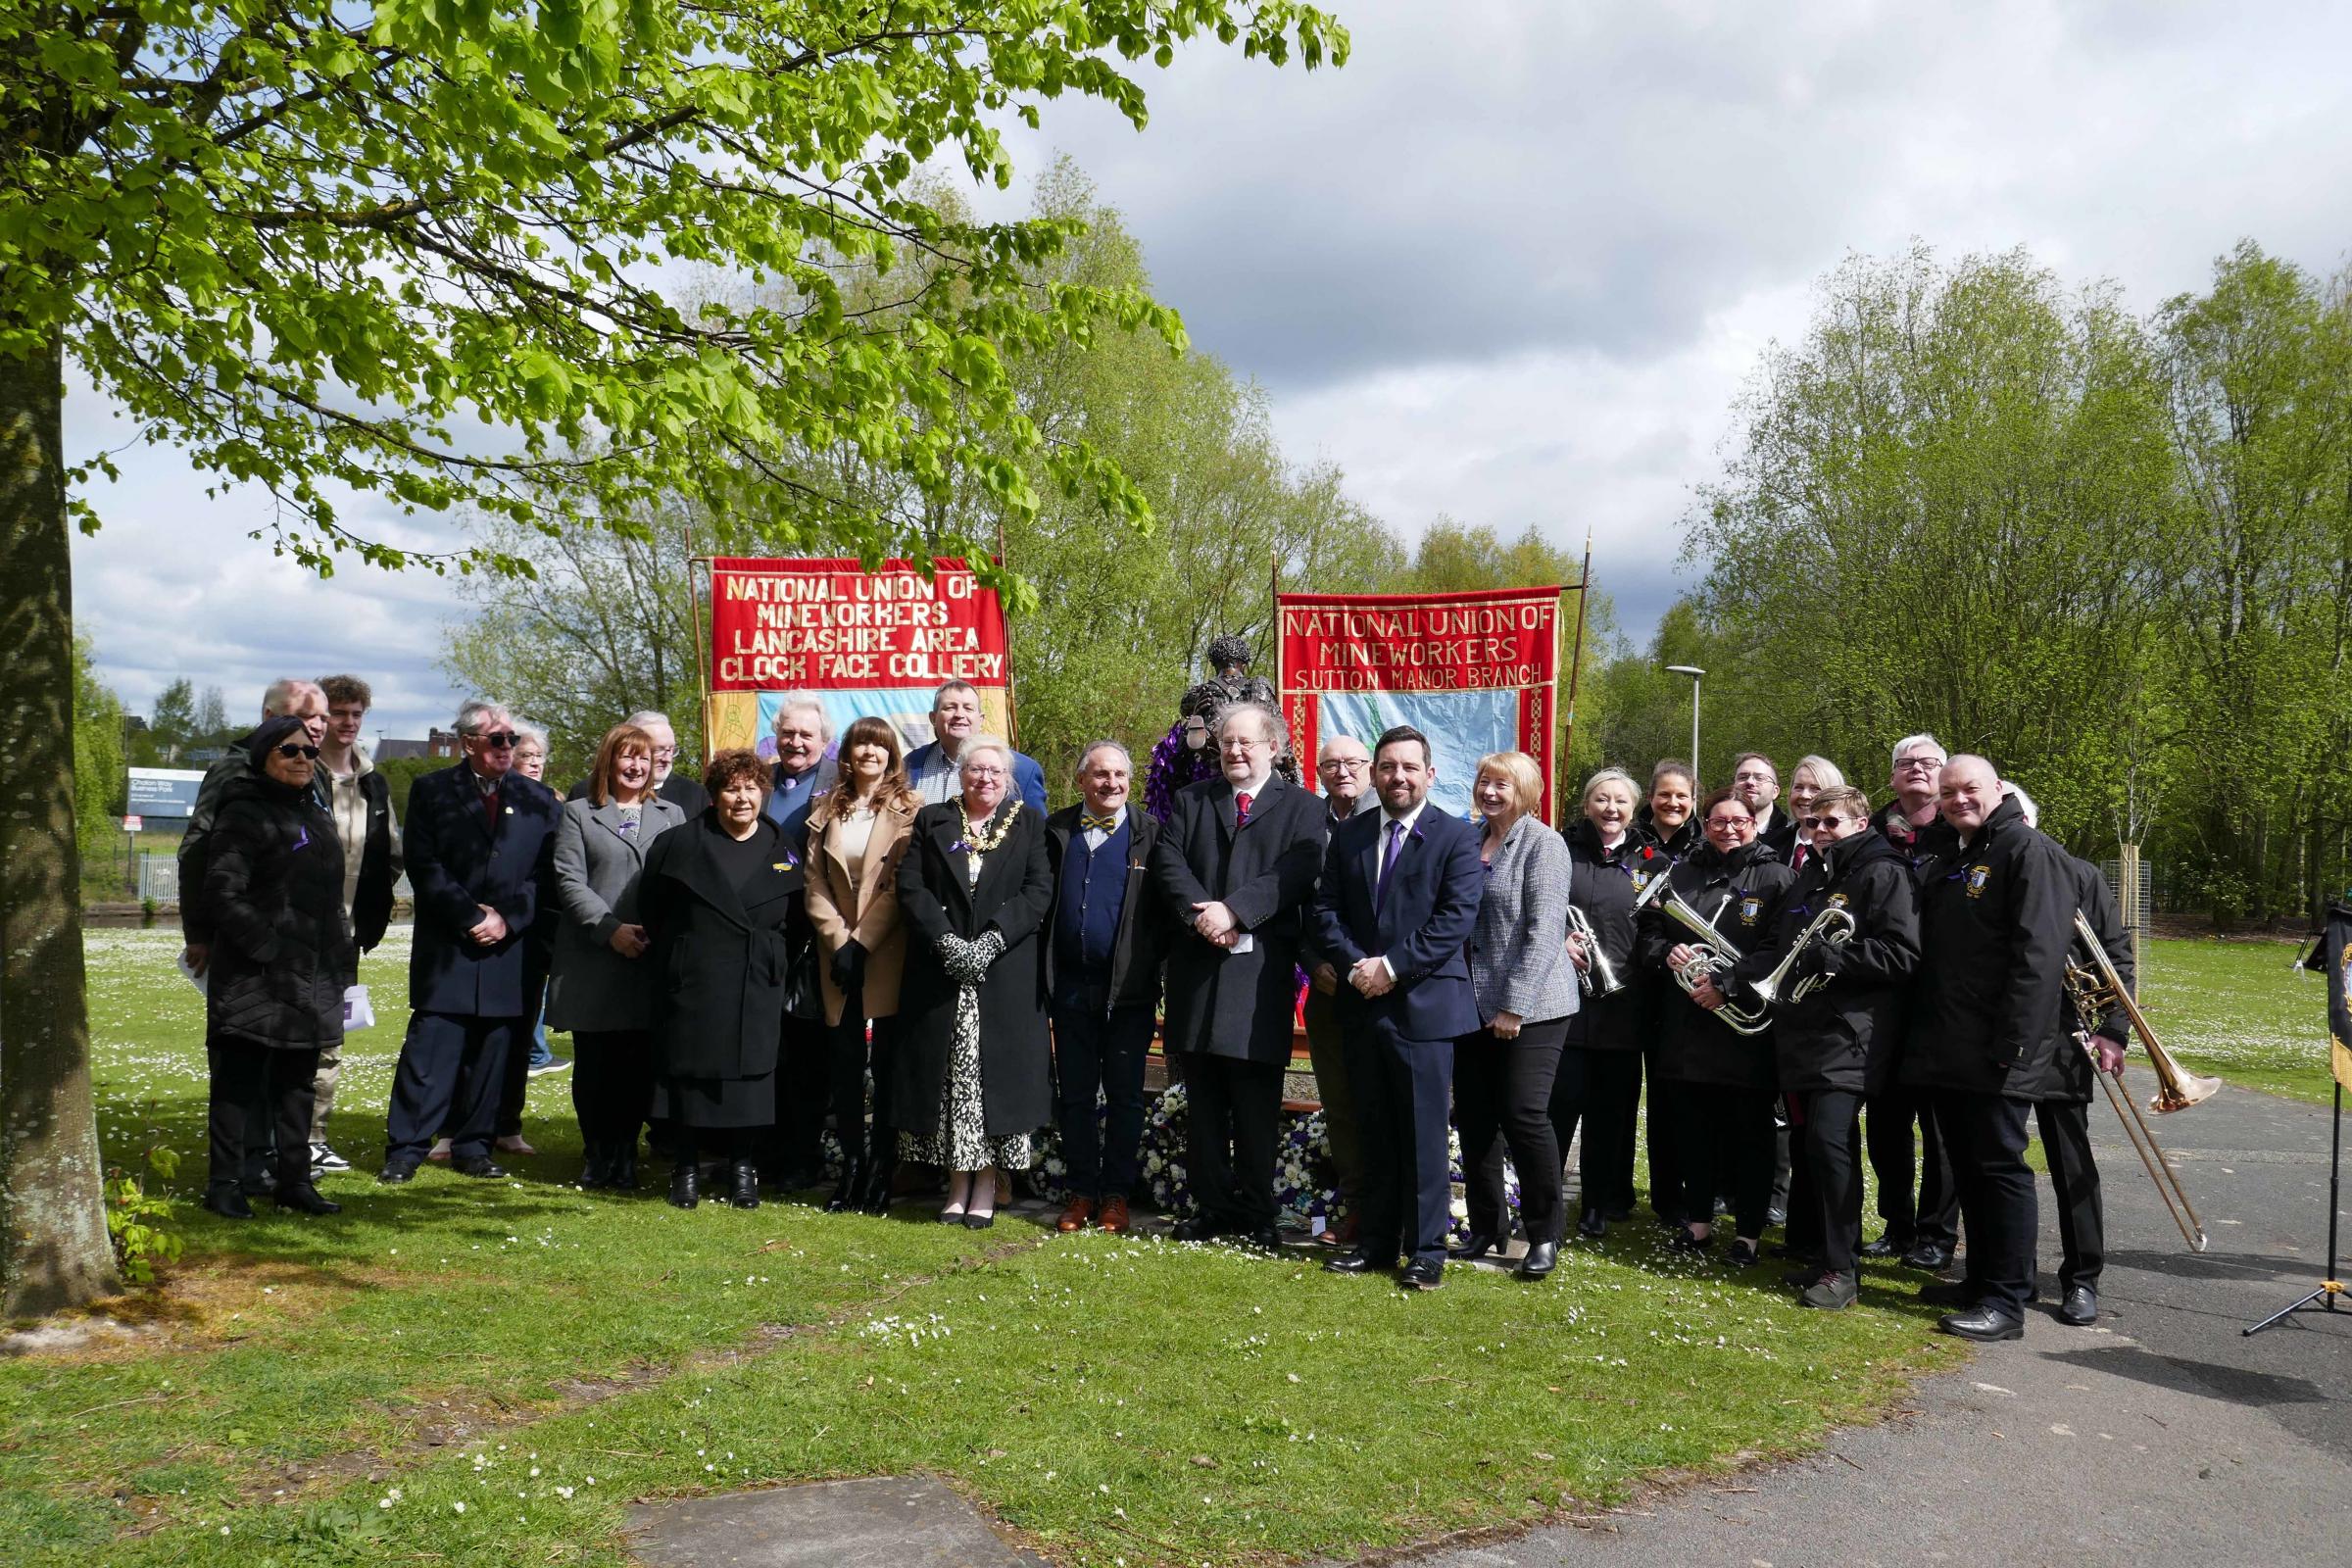 The service took place at the Workers Memorial statue Picture: Stan Riley